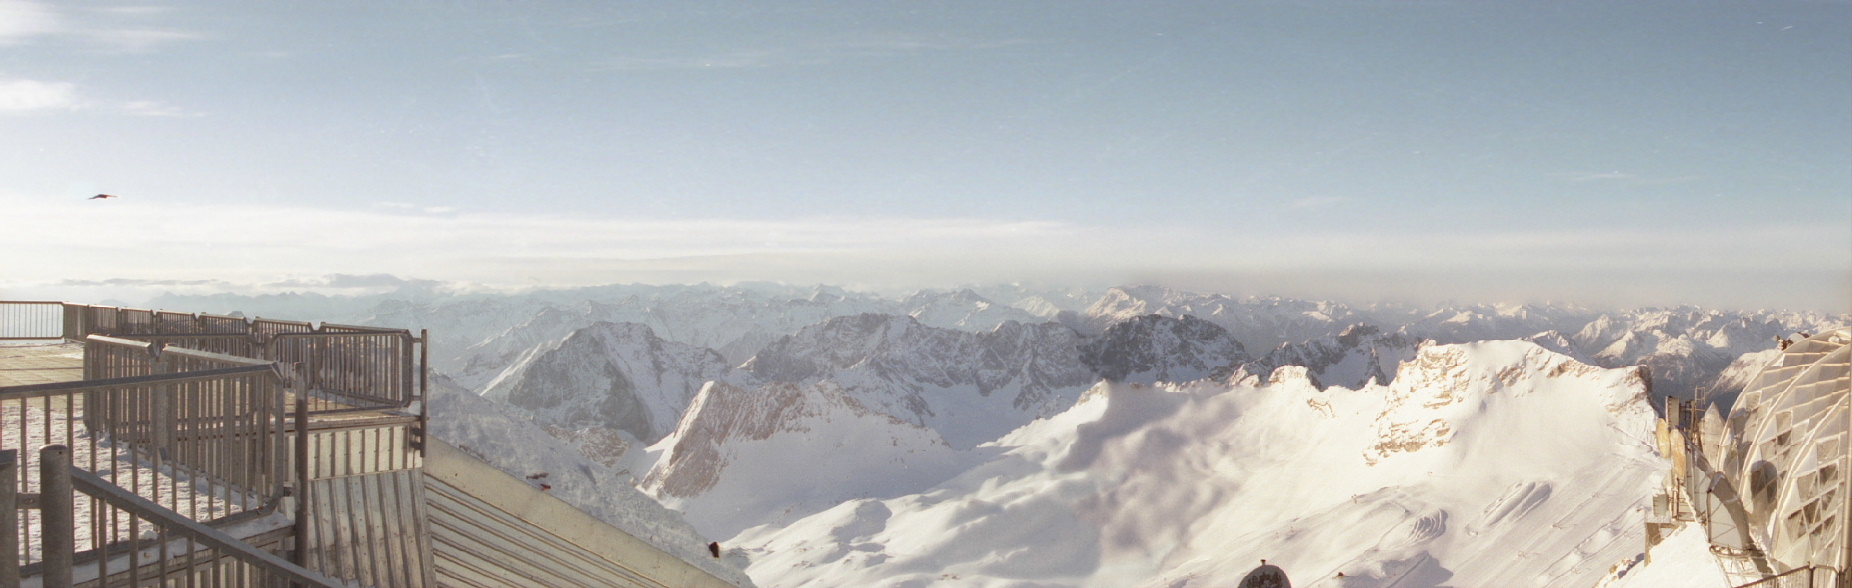 Looking towards Austria, Switzerland, and Italy from Zugspitz, the highest point in Germany